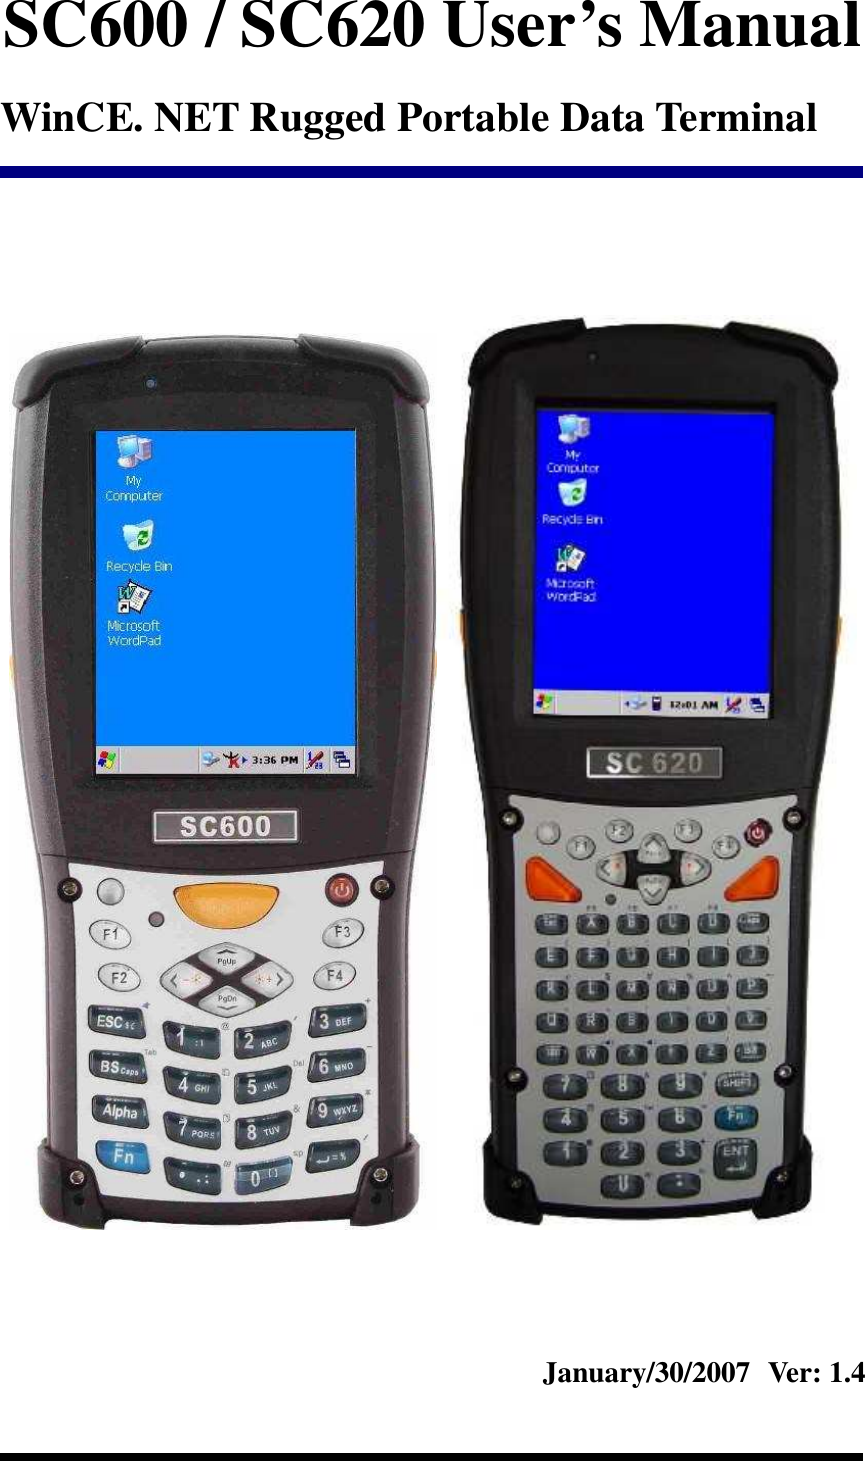  SC600 / SC620 User’s Manual WinCE. NET Rugged Portable Data Terminal         January/30/2007   Ver: 1.4 